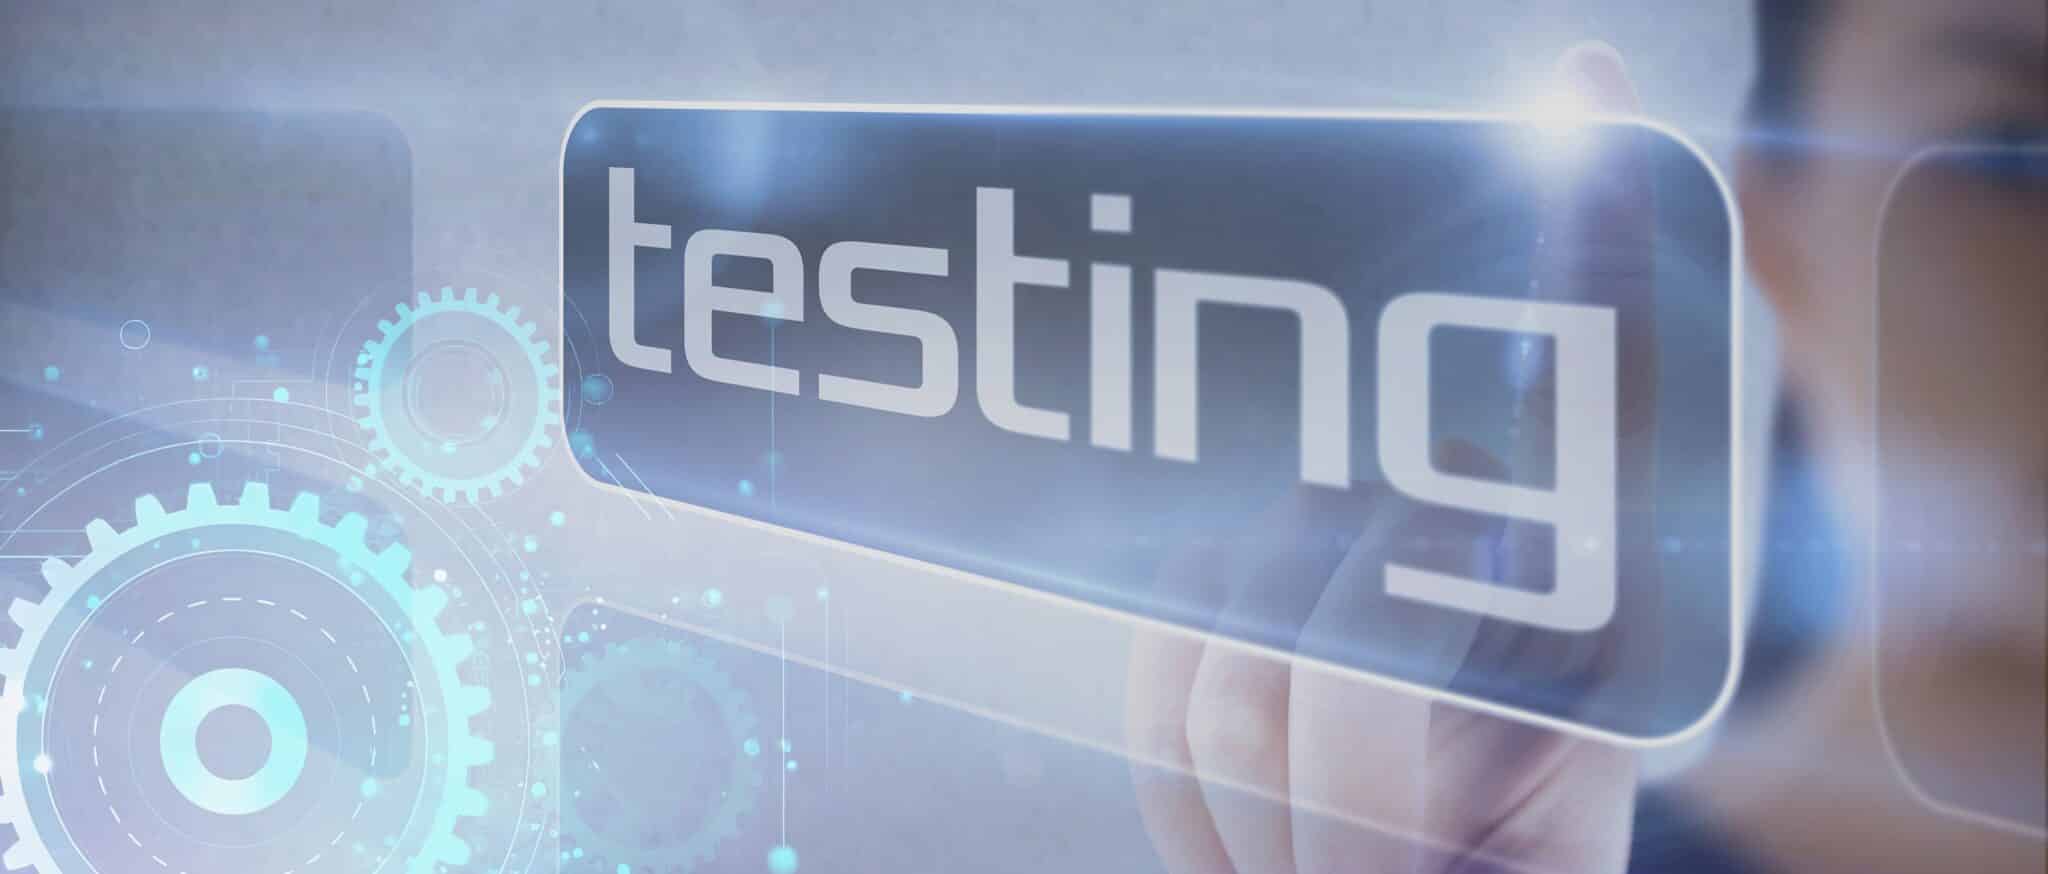 Banking Application Testing: Approach and All Workflow Step-by-Step